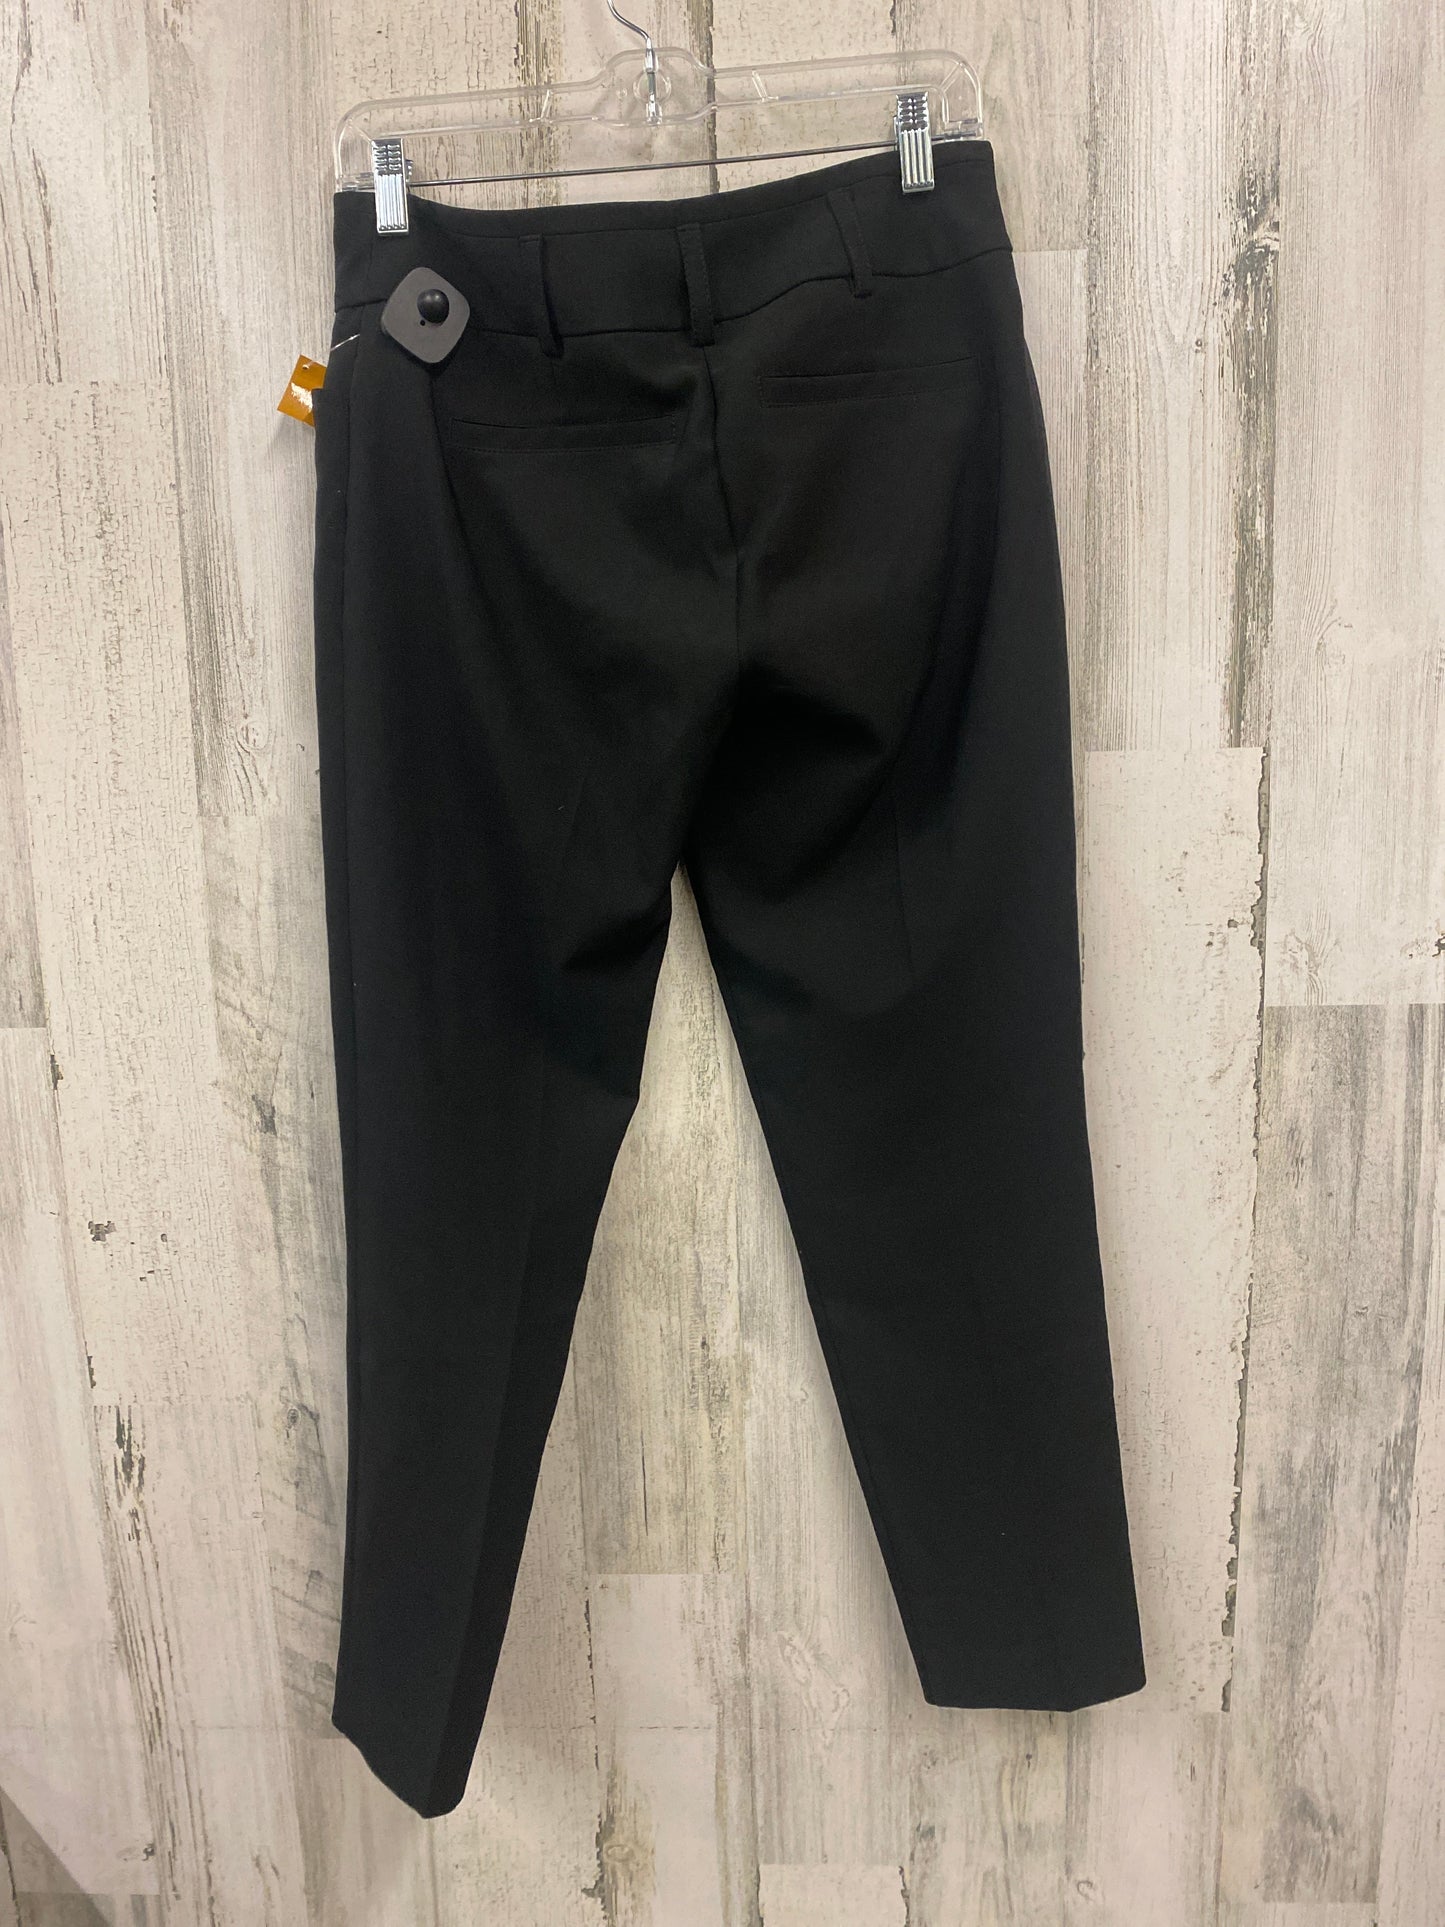 Pants Other By New York And Co  Size: 4